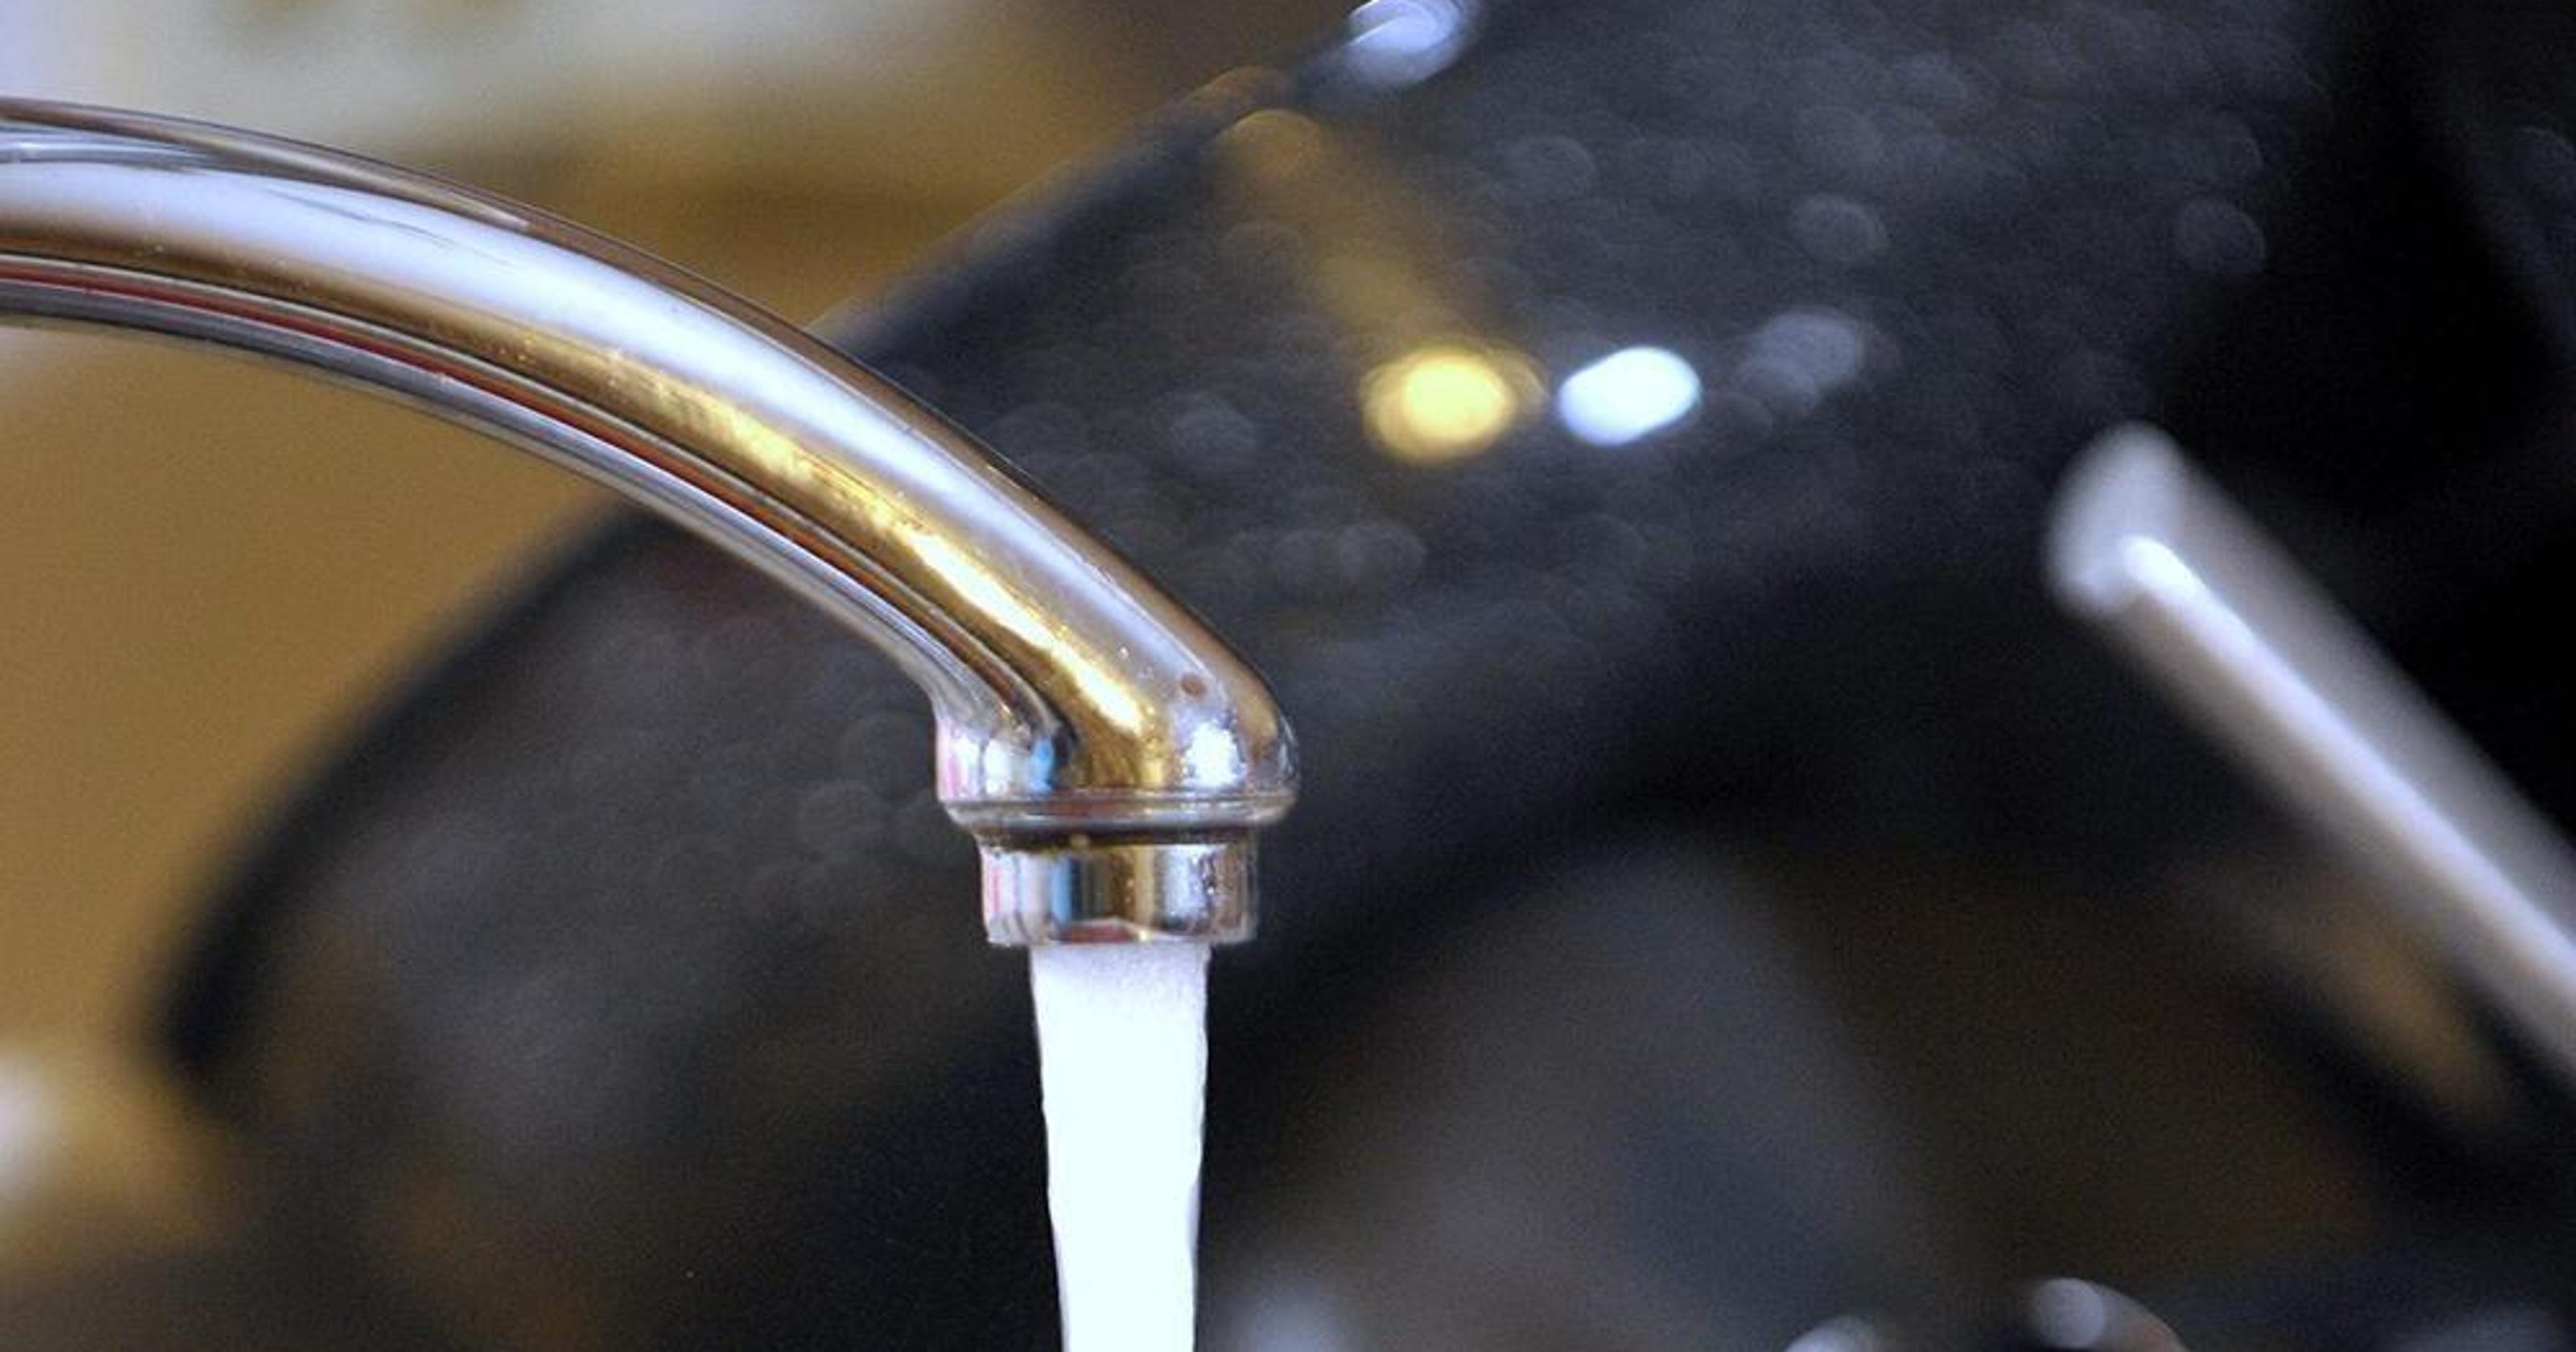 Tests find Birmingham has 5 sites with lead-tainted water; White Lake, 3 - The Detroit News